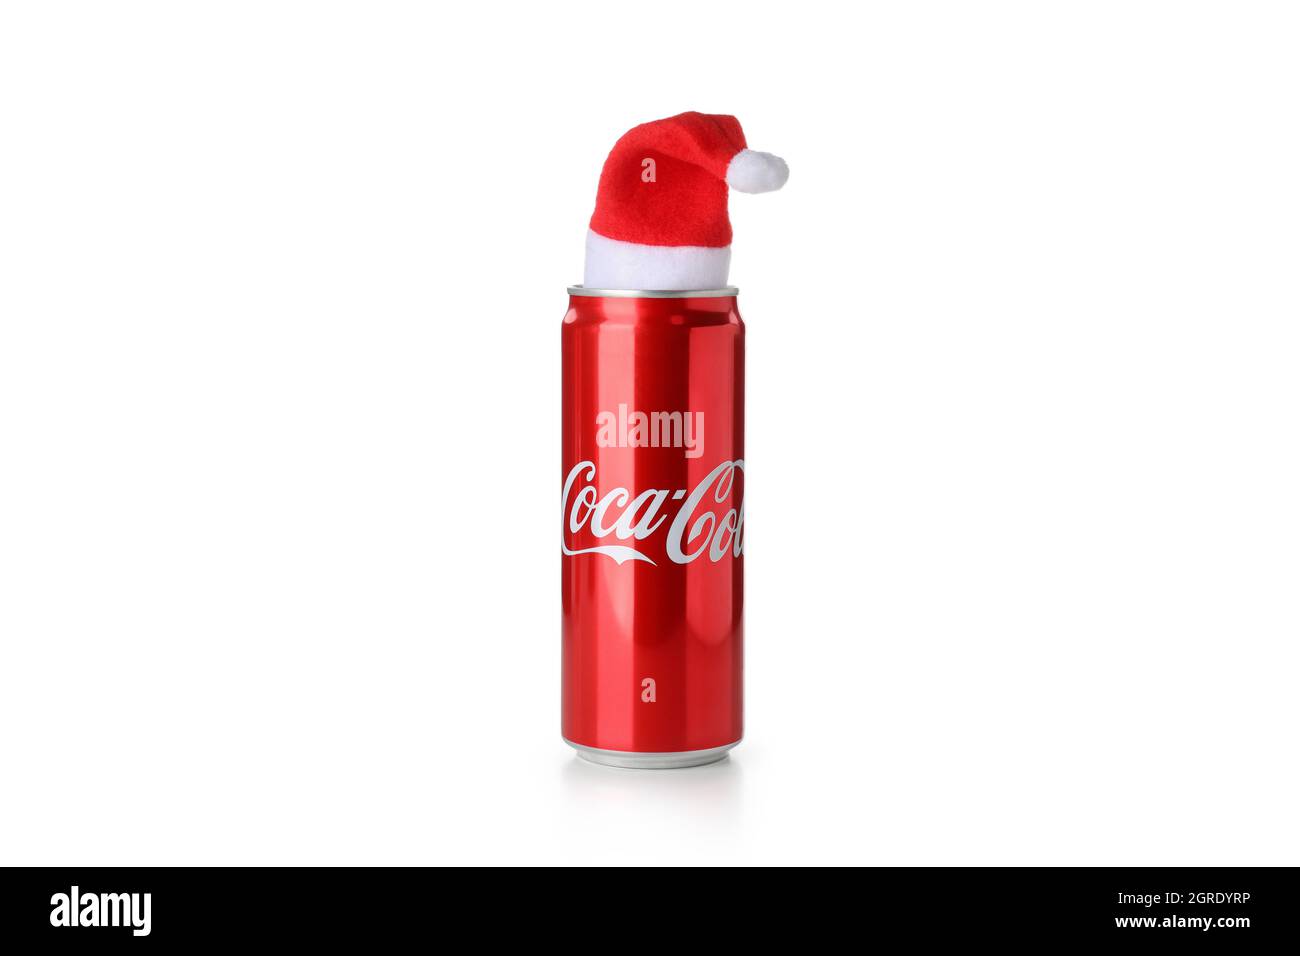 Odessa, Ukraine - September 23, 2021: Coca - Cola can with Santa hat isolated on white background. Stock Photo